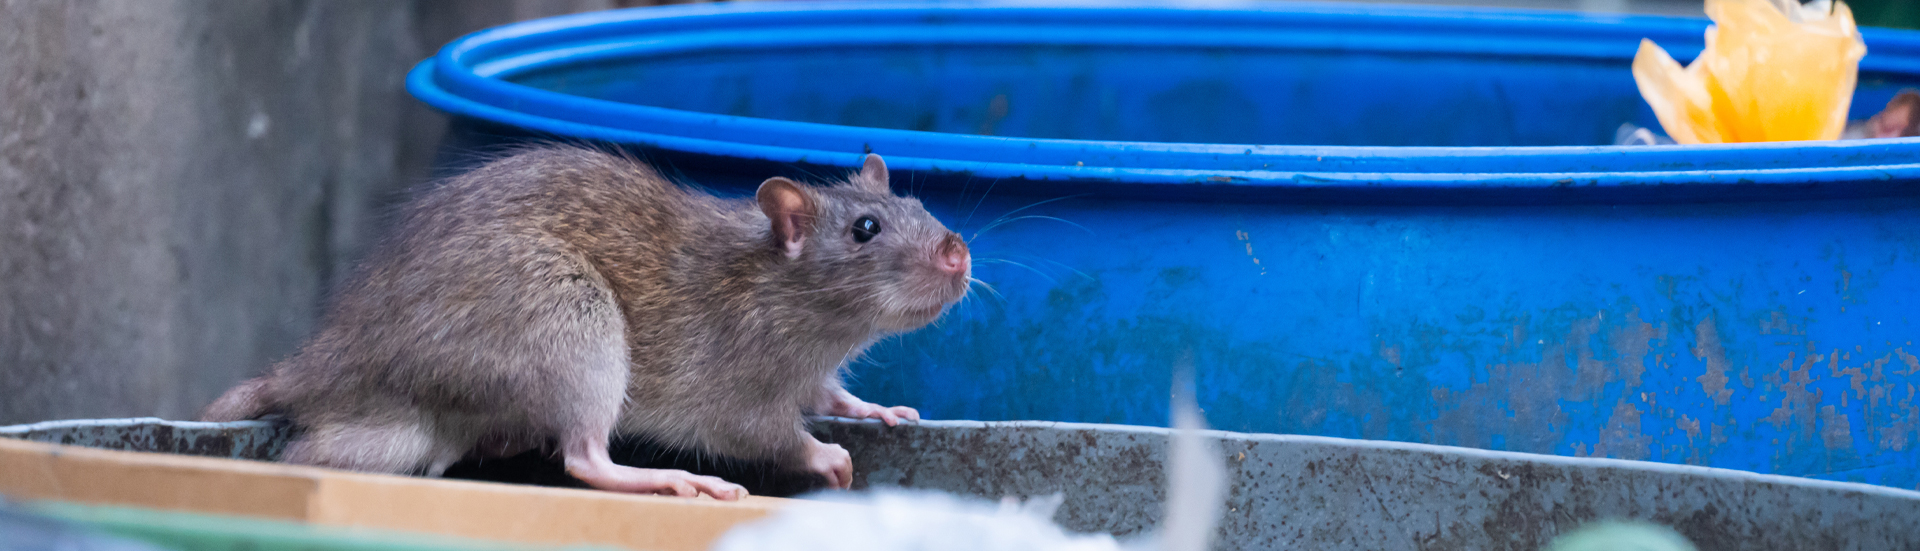 Rats And Mice In Philadelphia Exterminated By Evans Pest Control